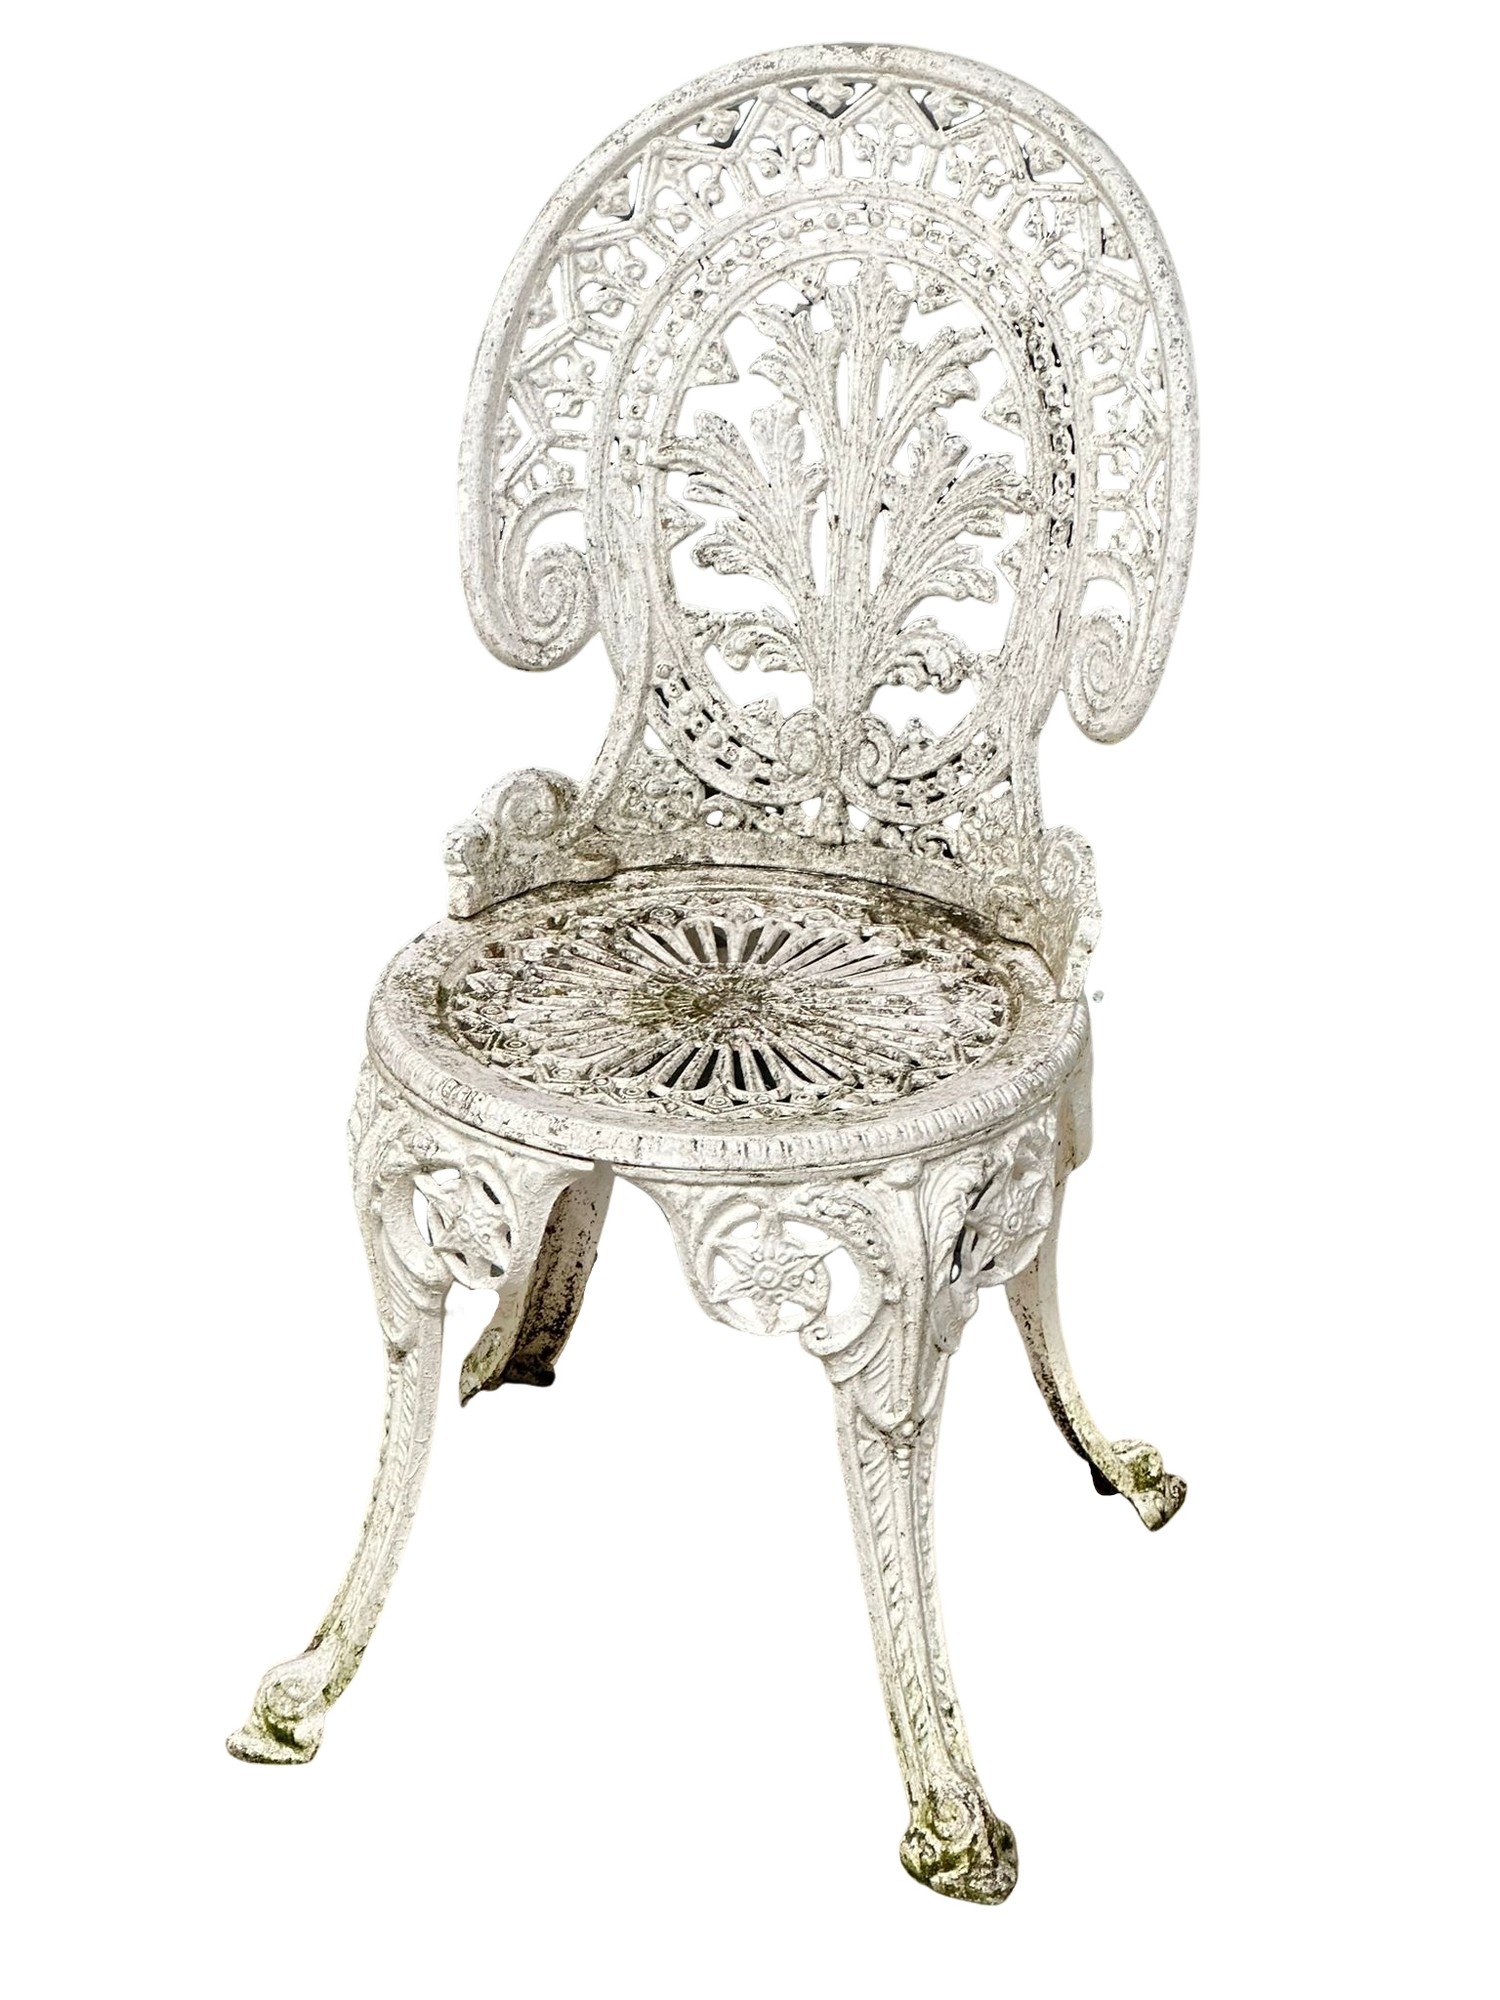 A set of 4 Victorian style cast alloy garden chairs. - Image 2 of 2